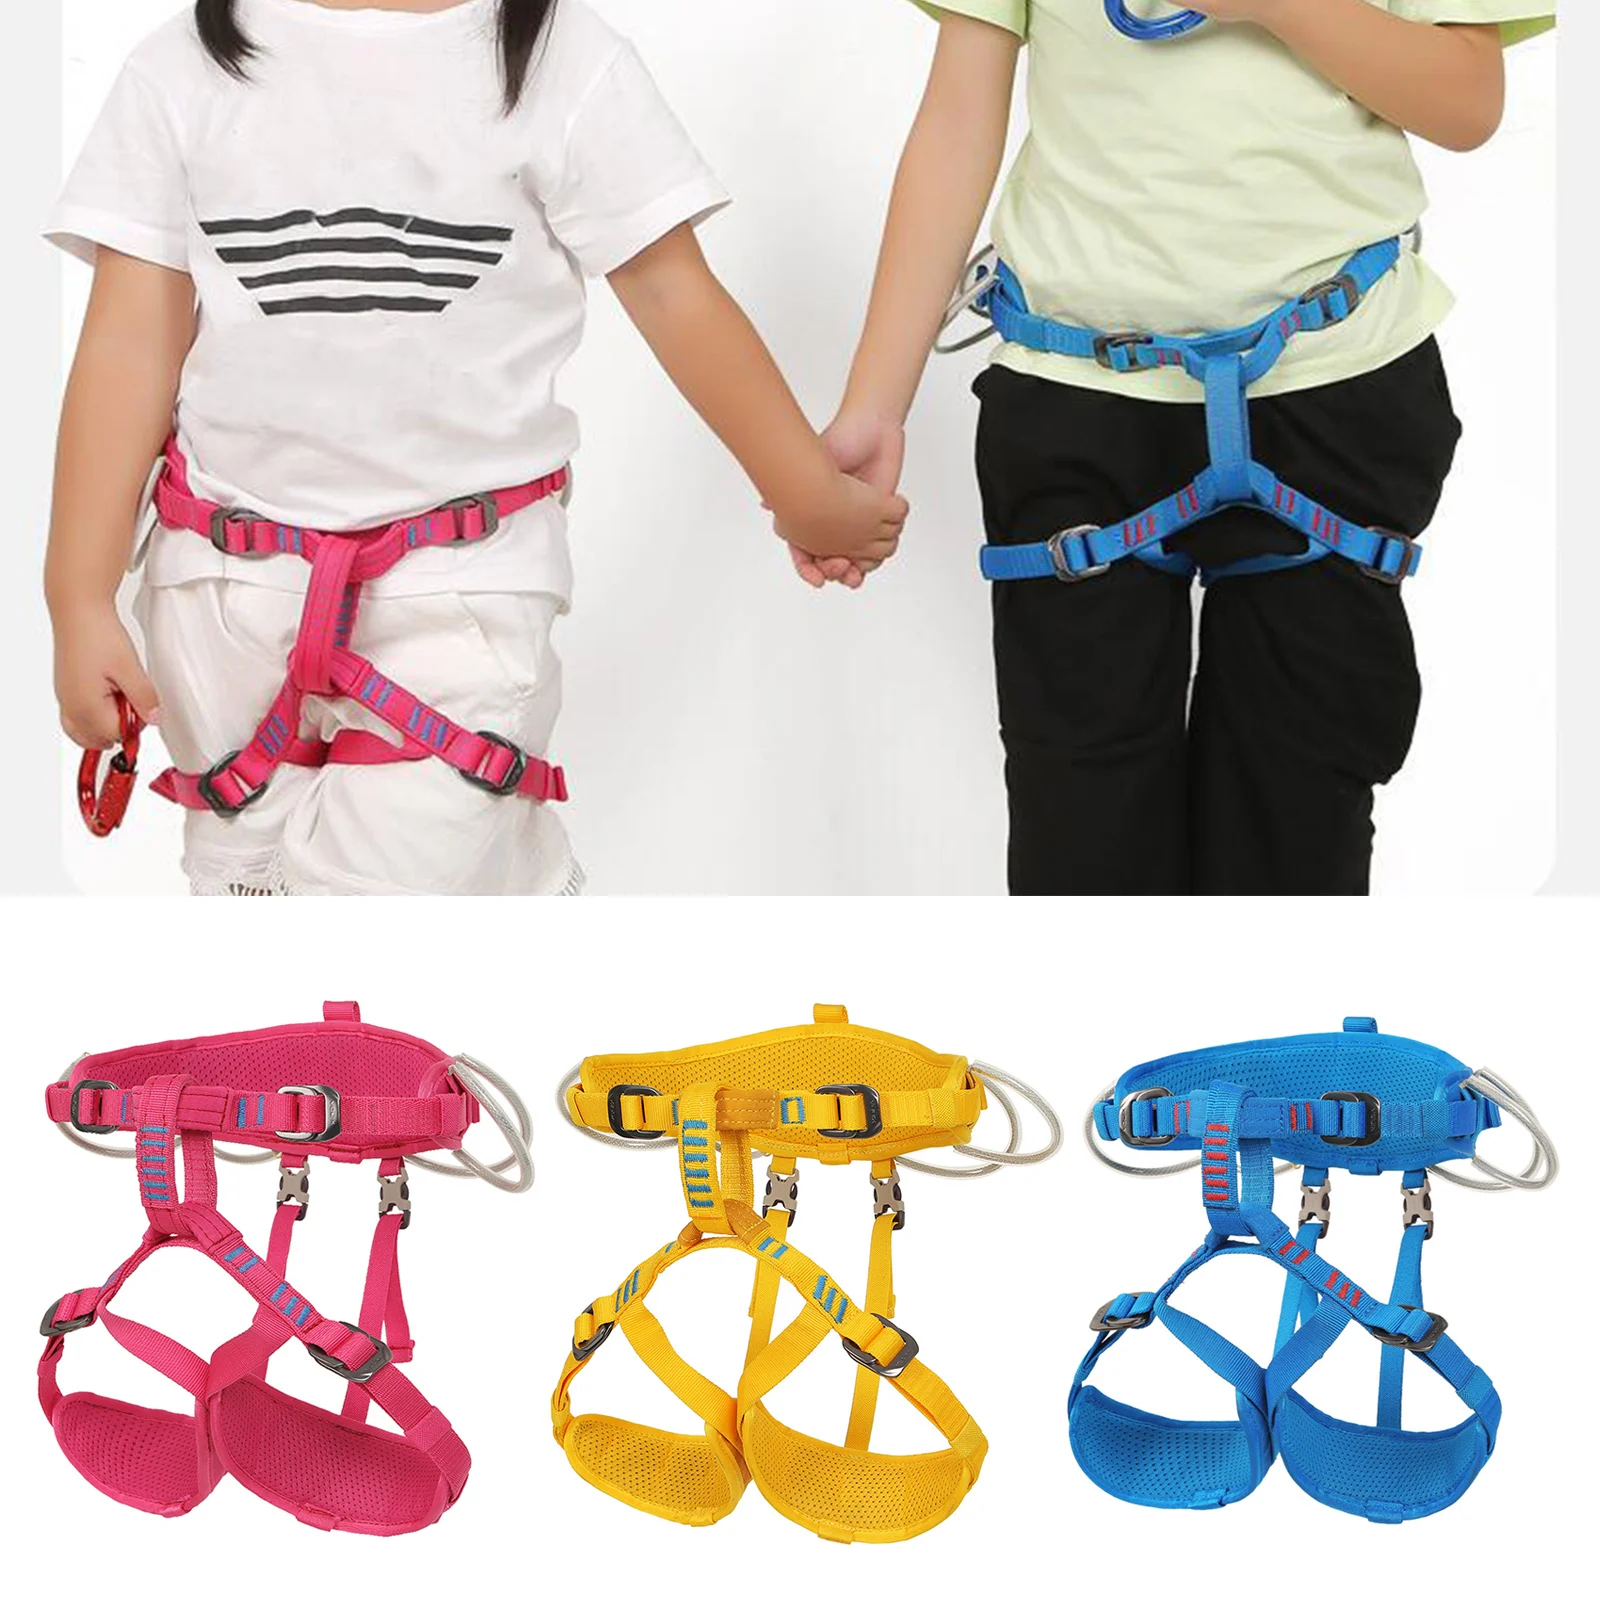 children training half body safety harness rock climbing rappelling tree protect waist safety belts mountaineering equipment free global shipping